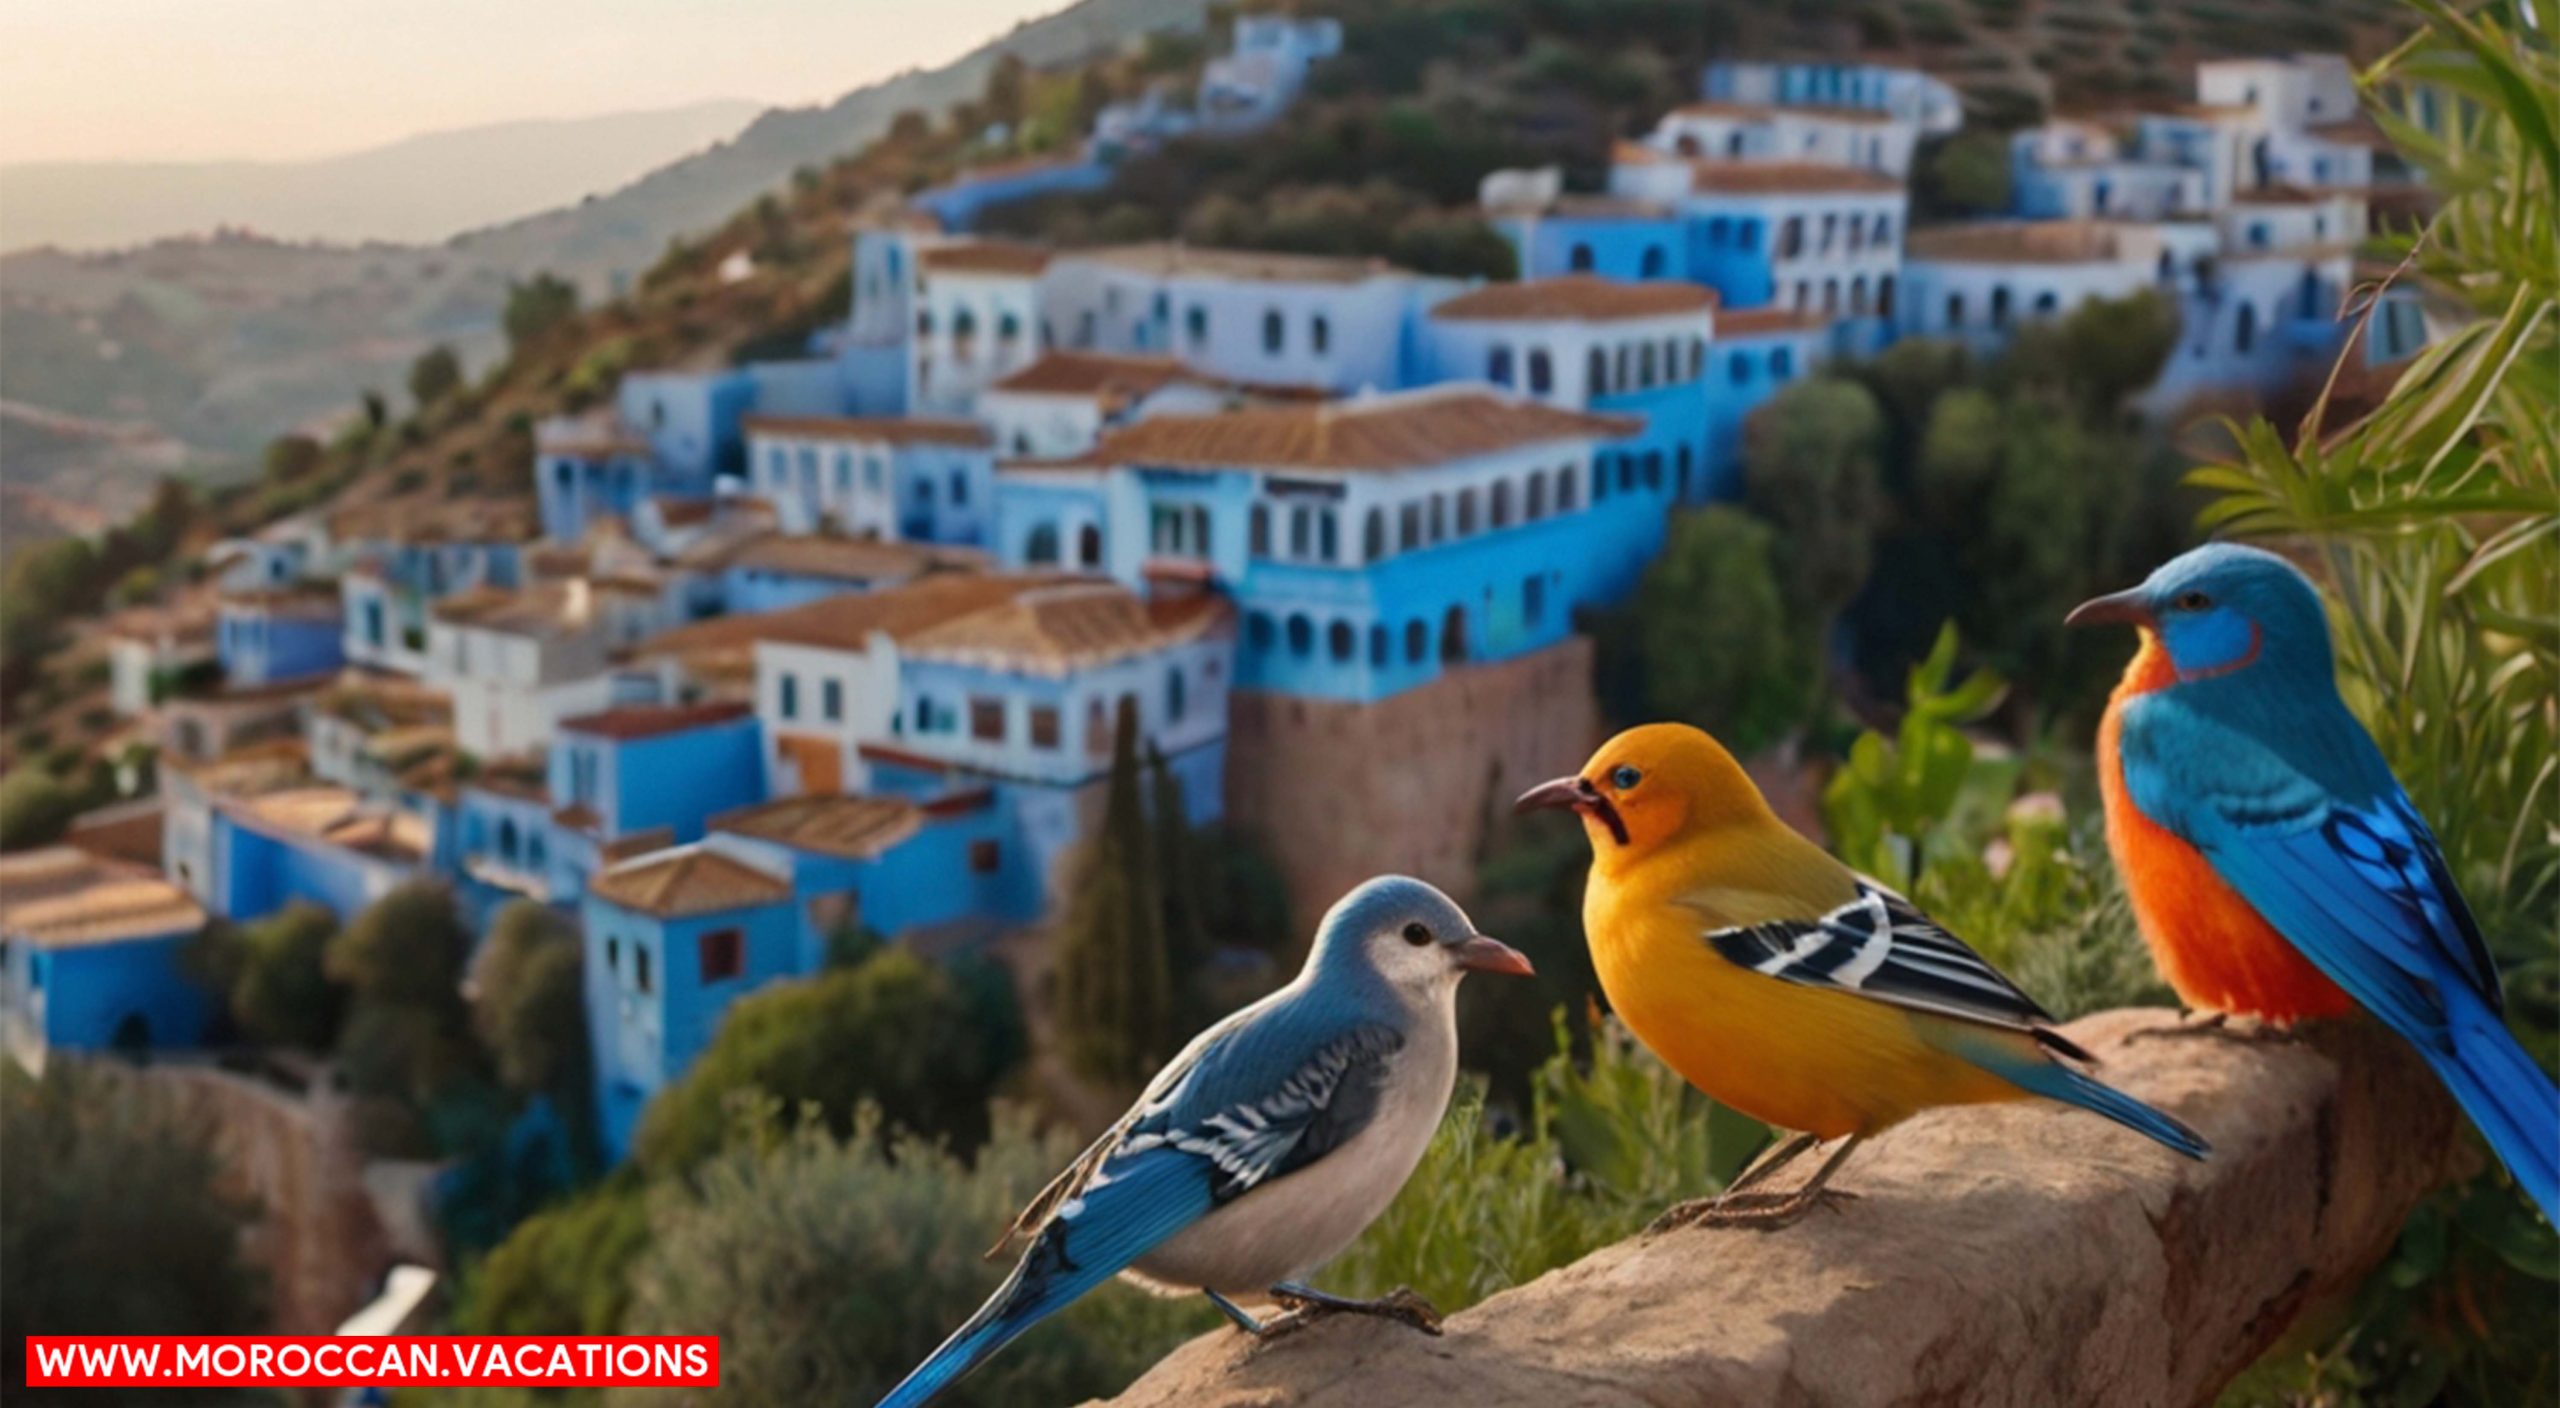 An image of birds in chefchaouen.